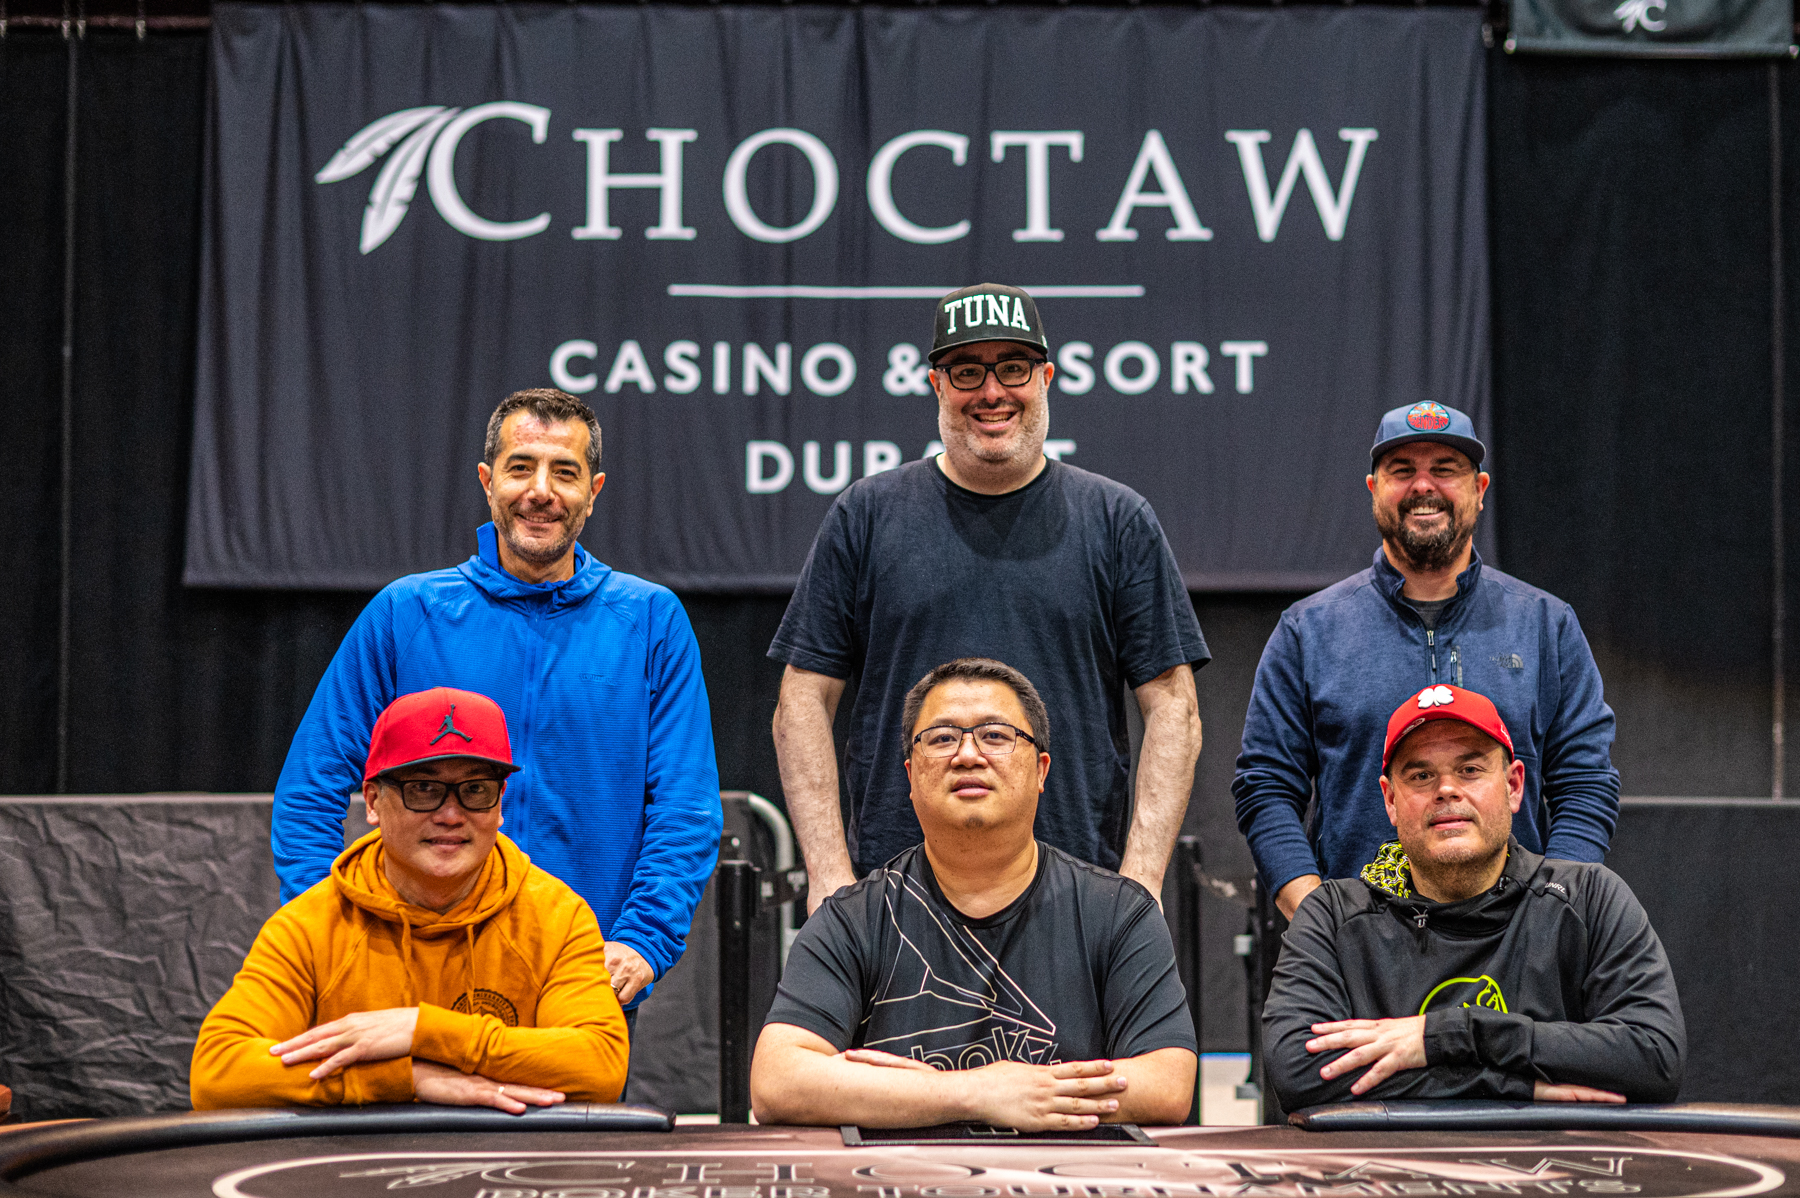 Bin Weng Bags Second World Poker Tour Final Table in a Row at Choctaw